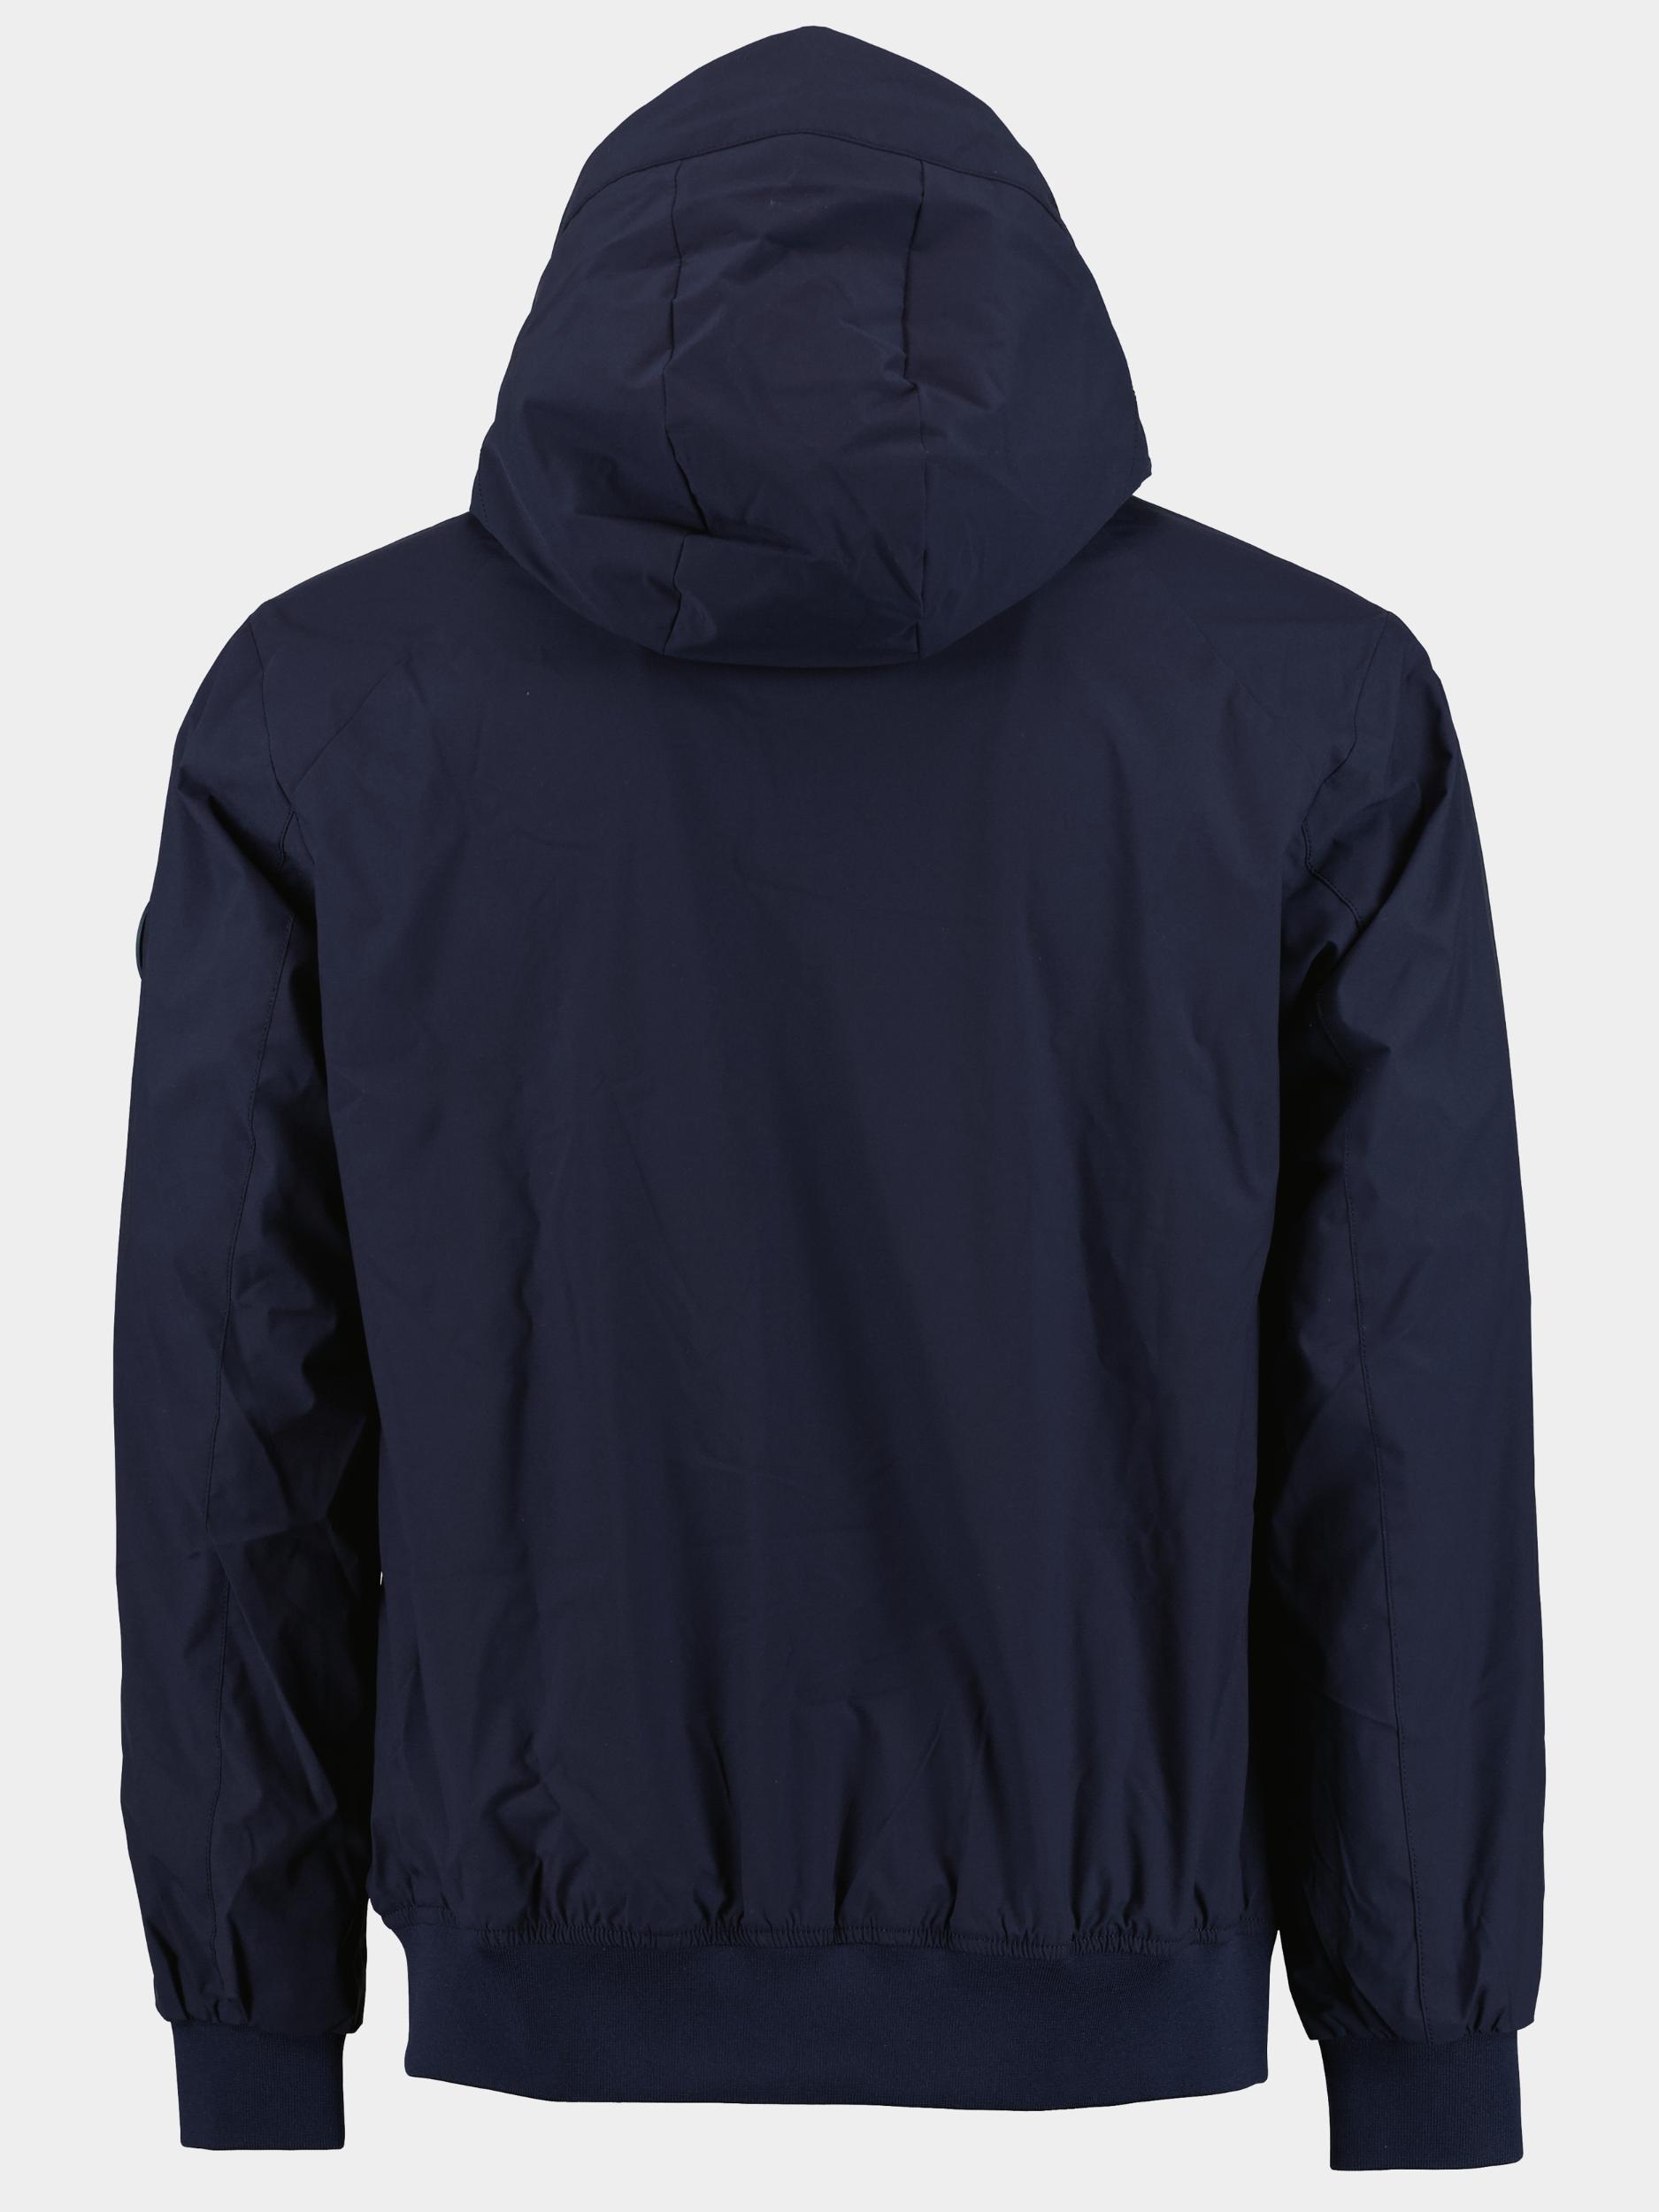 Airforce Zomerjack Blauw Hooded Four-way Stretch jacket FRM0962/545